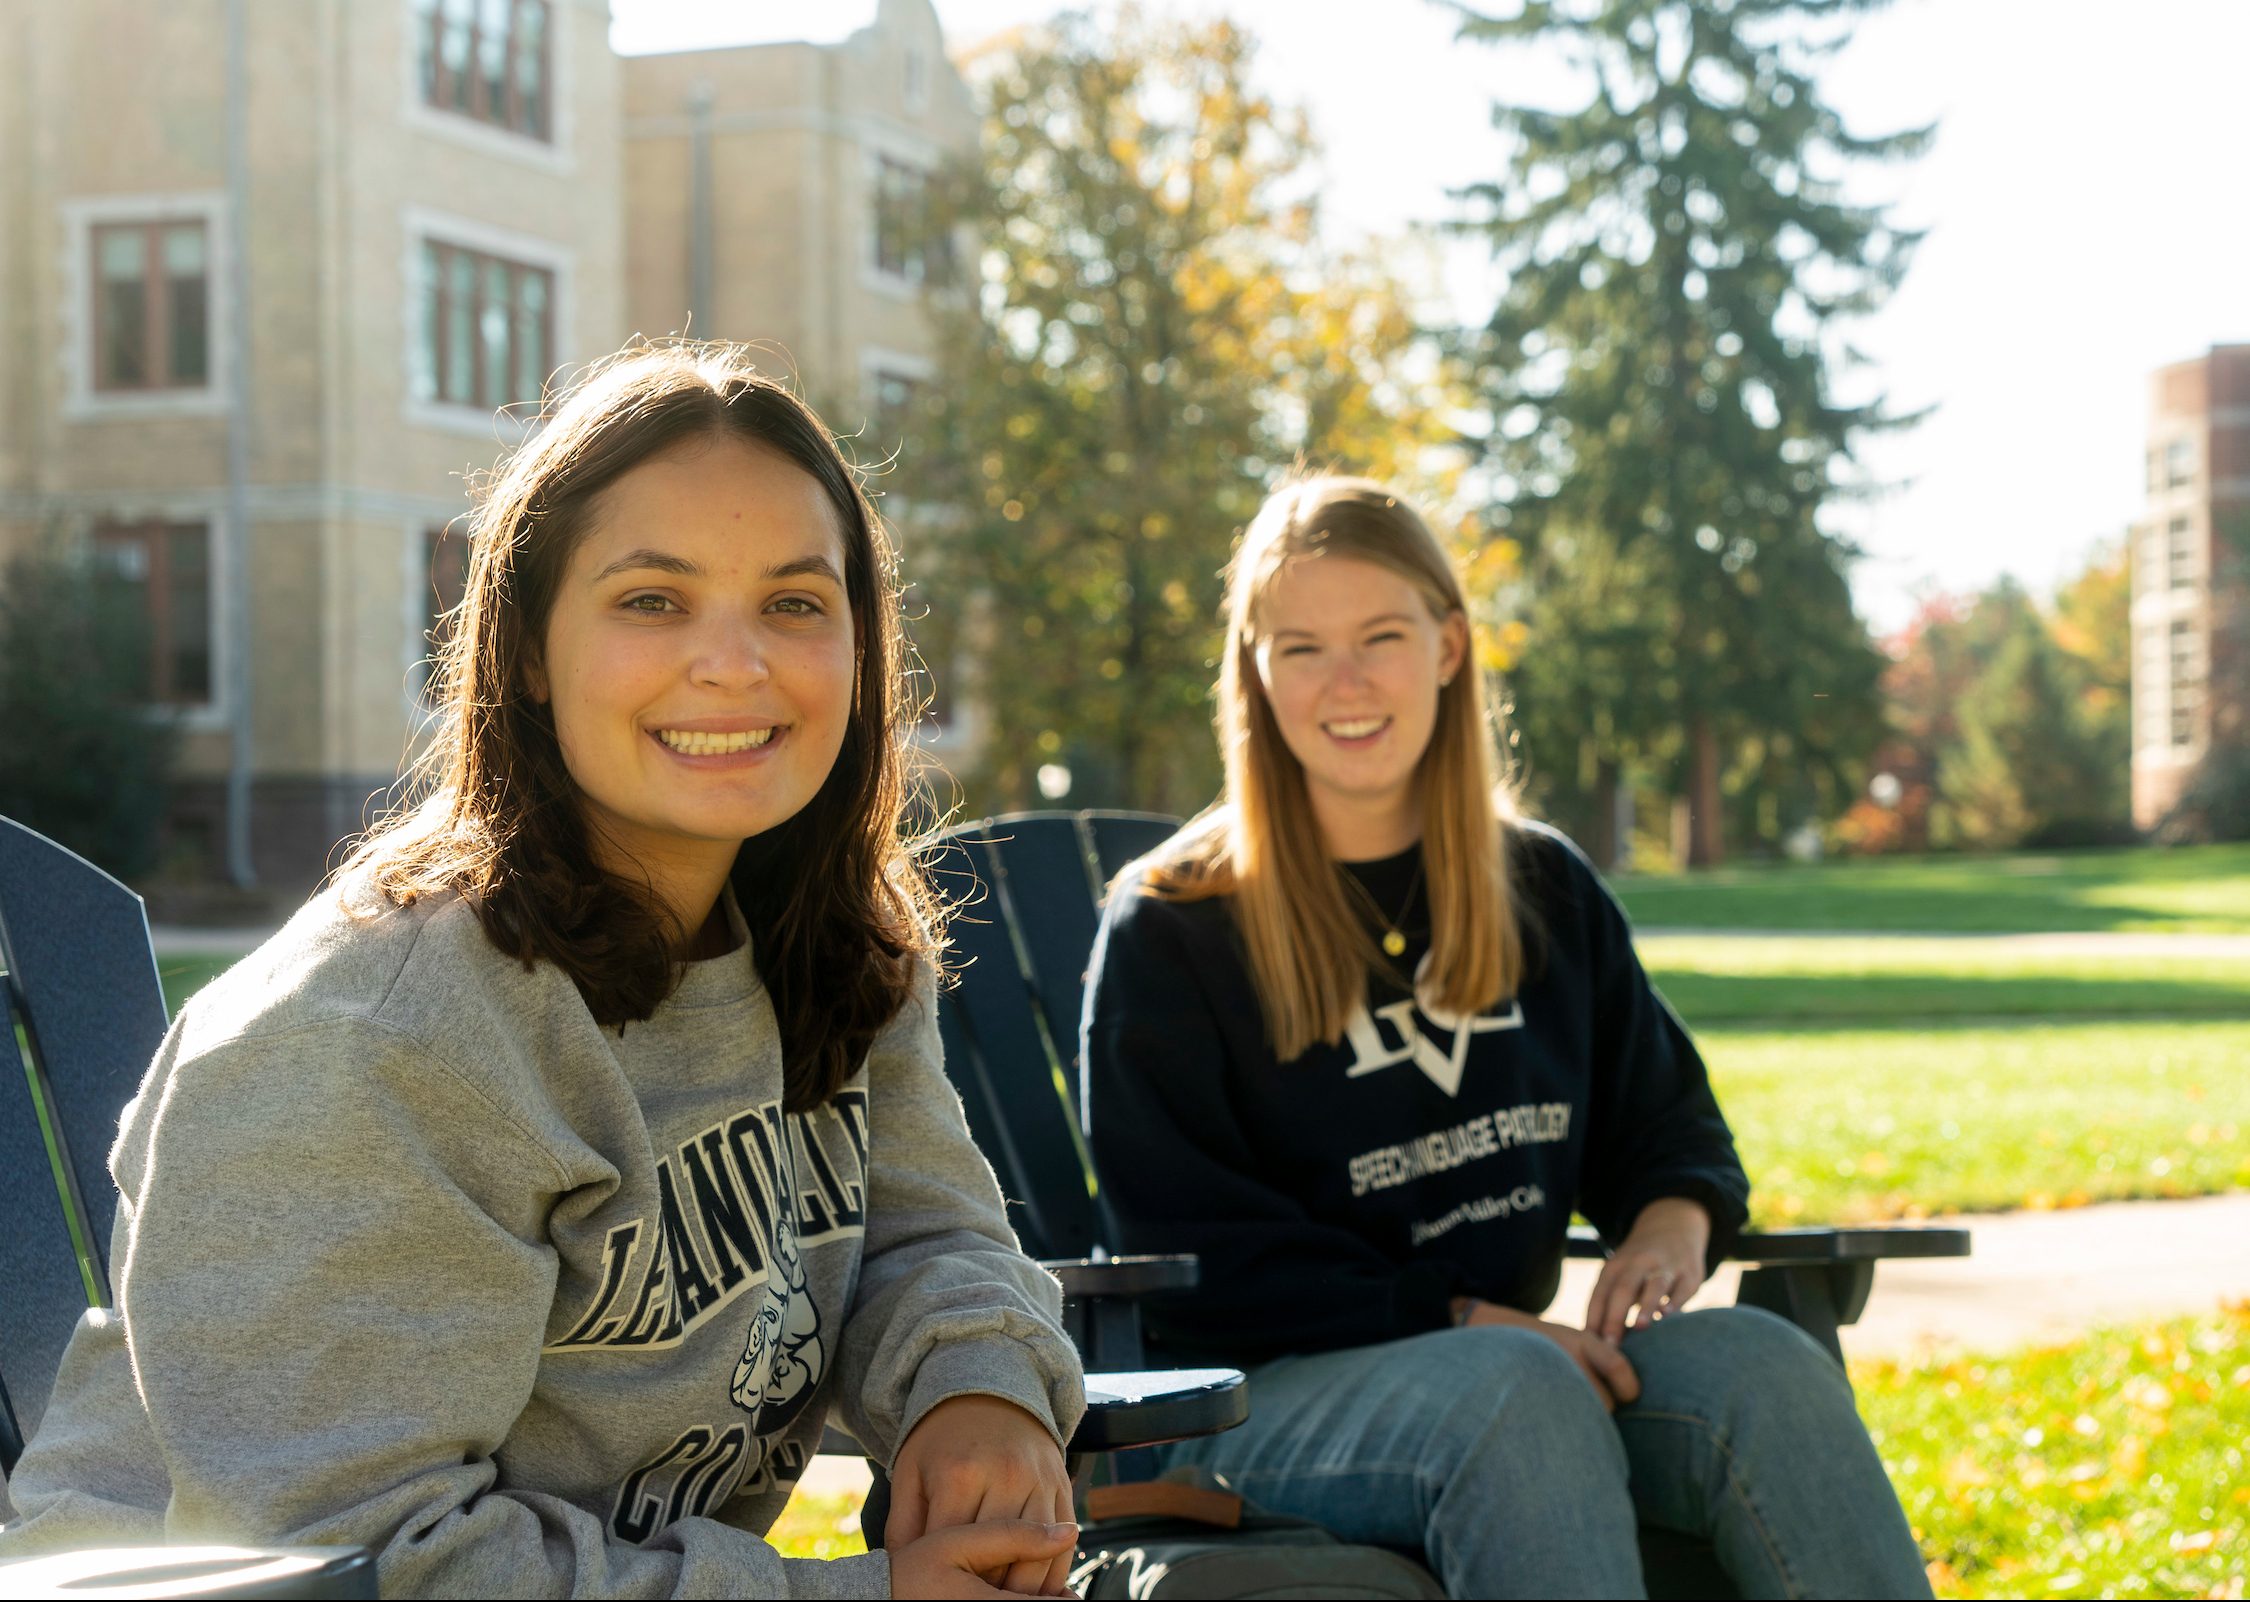 Students smile while sitting on campus quad